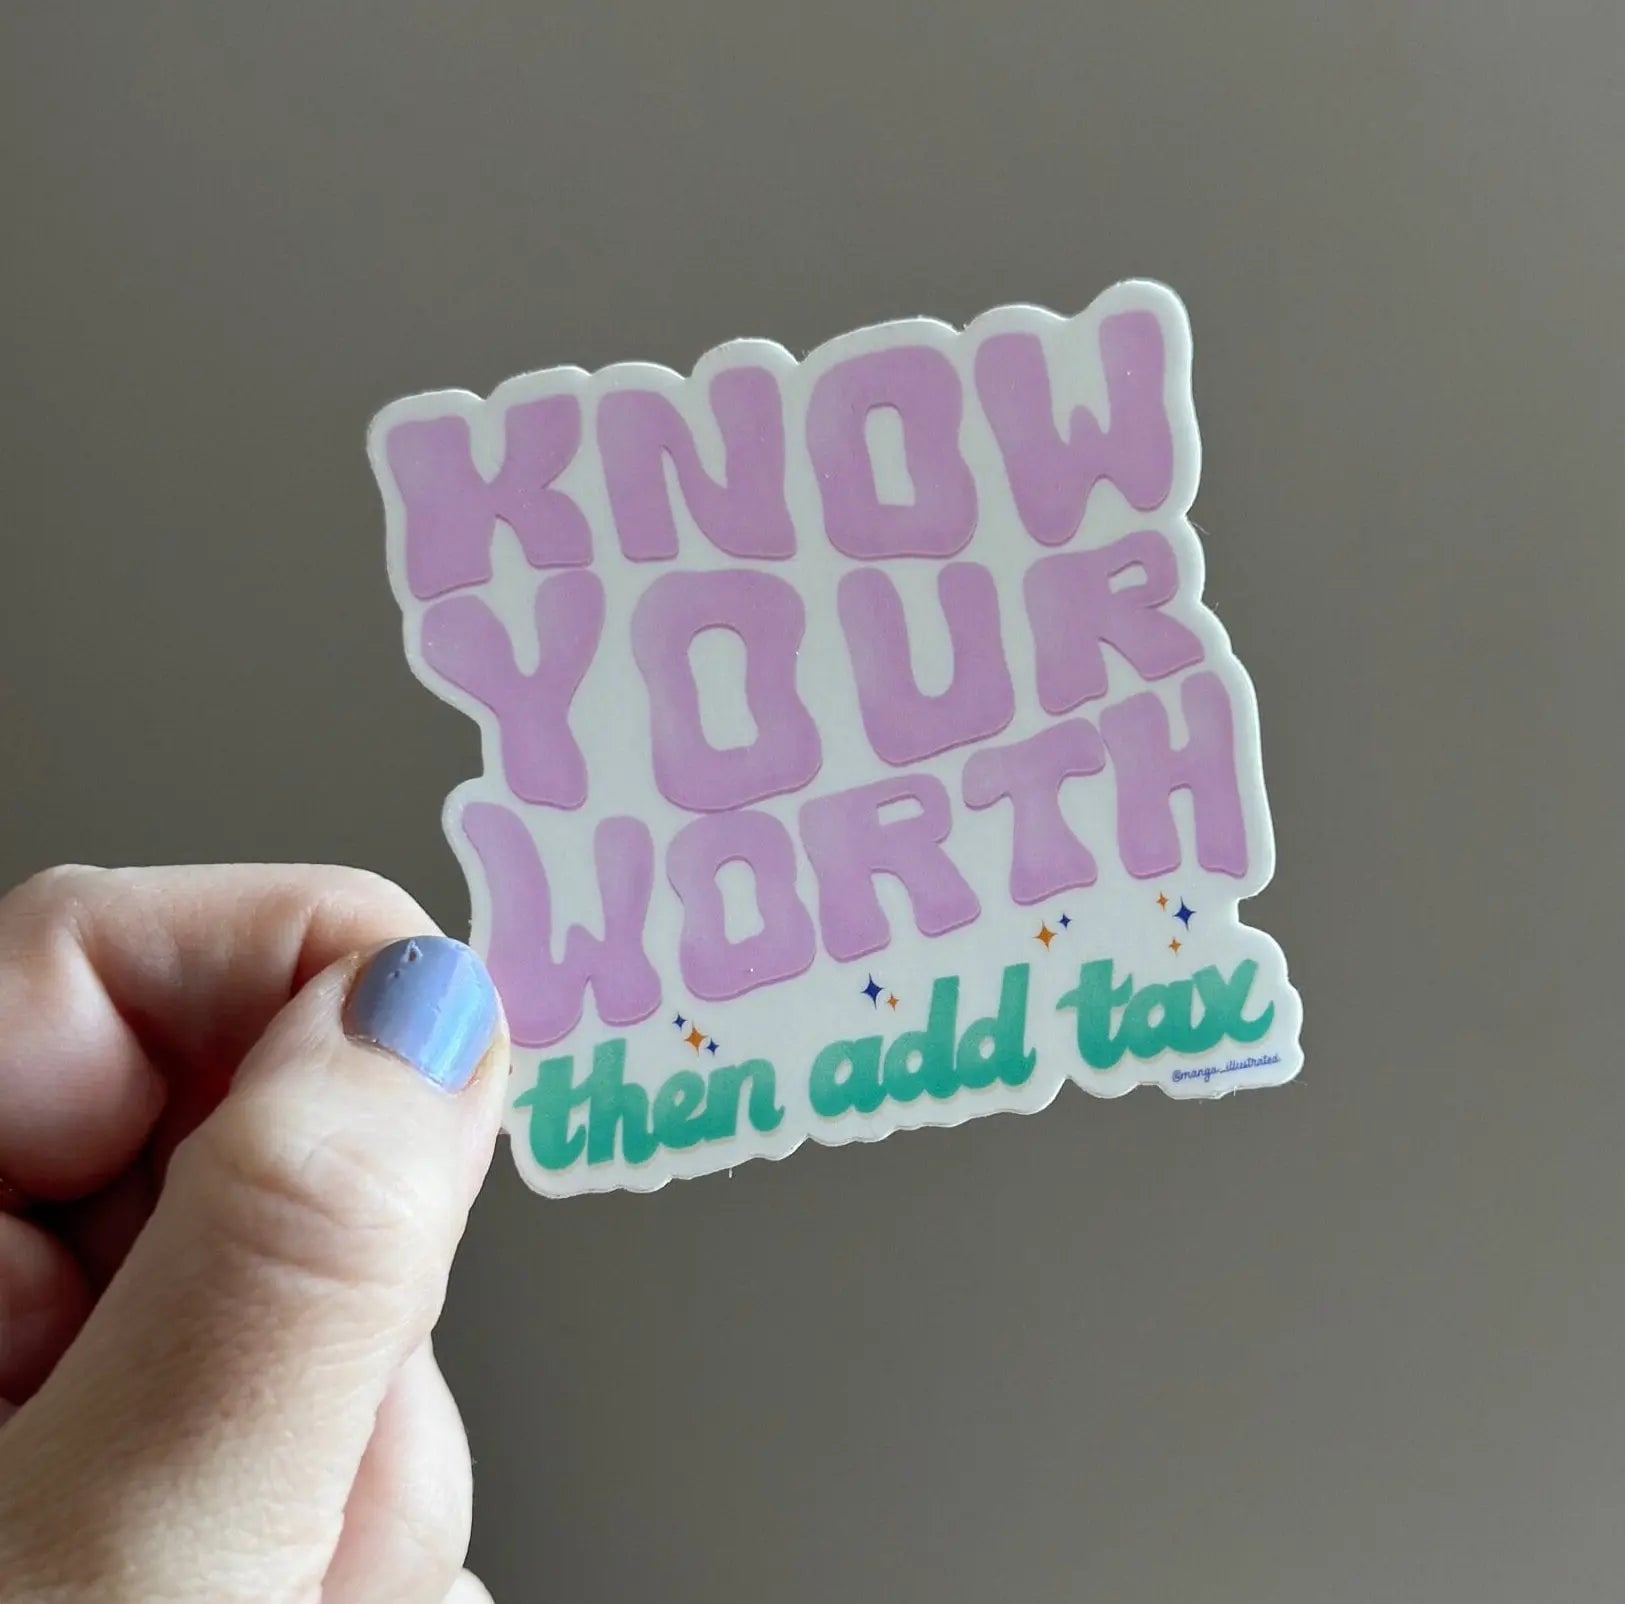 Know your worth then add tax sticker MangoIllustrated